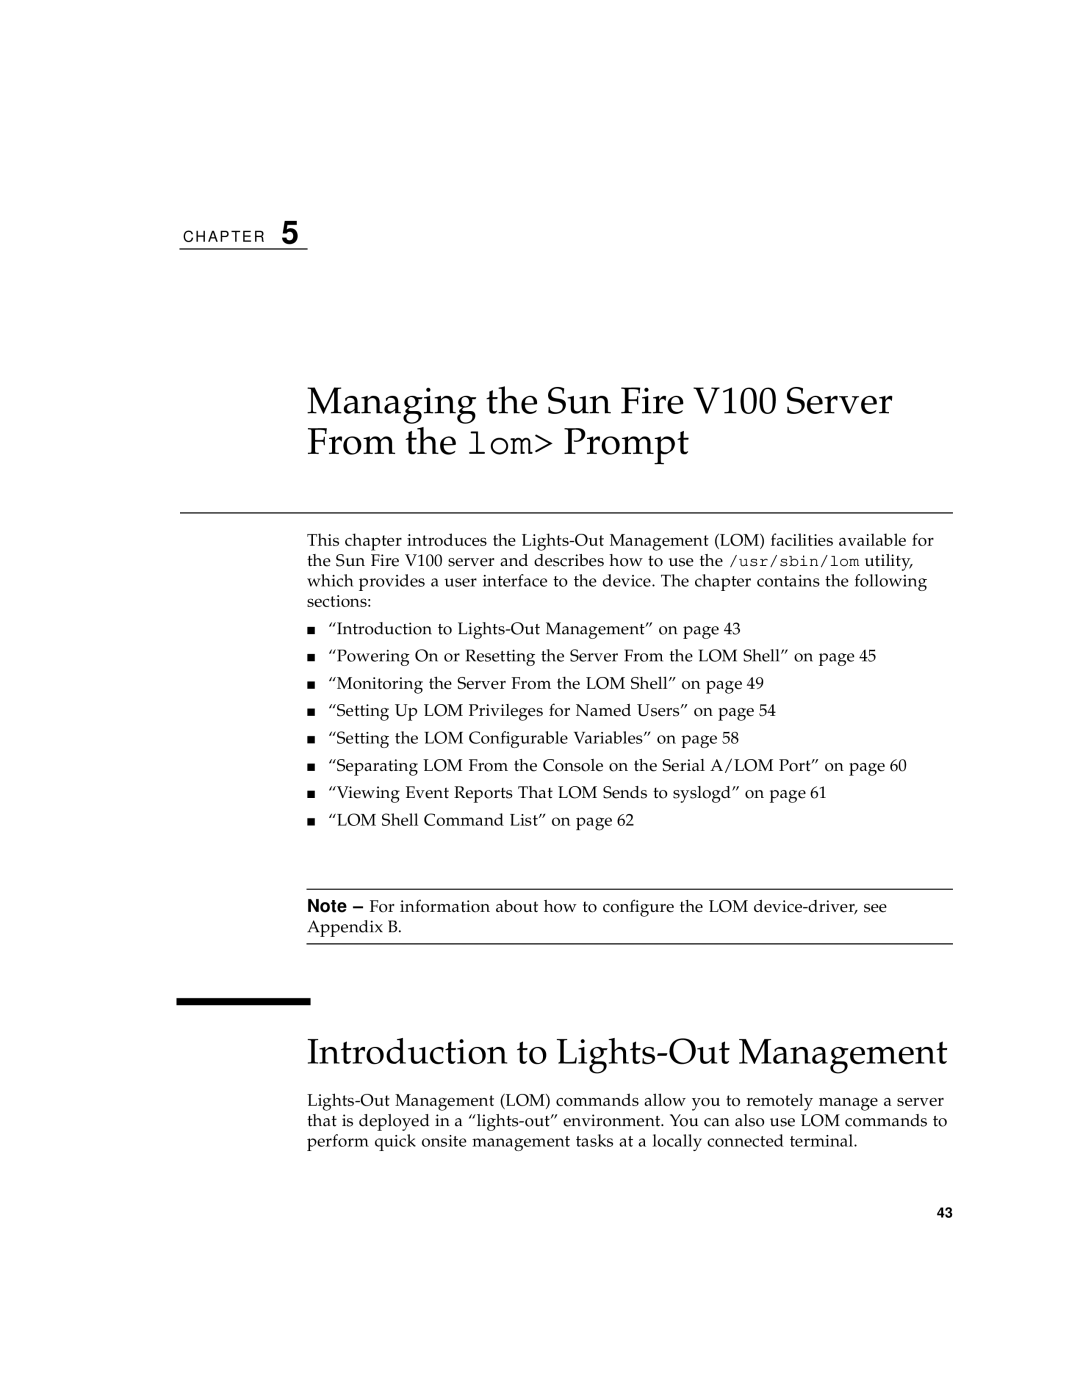 Sun Microsystems manual Managing the Sun Fire V100 Server From the lom Prompt, Introduction to Lights-Out Management 